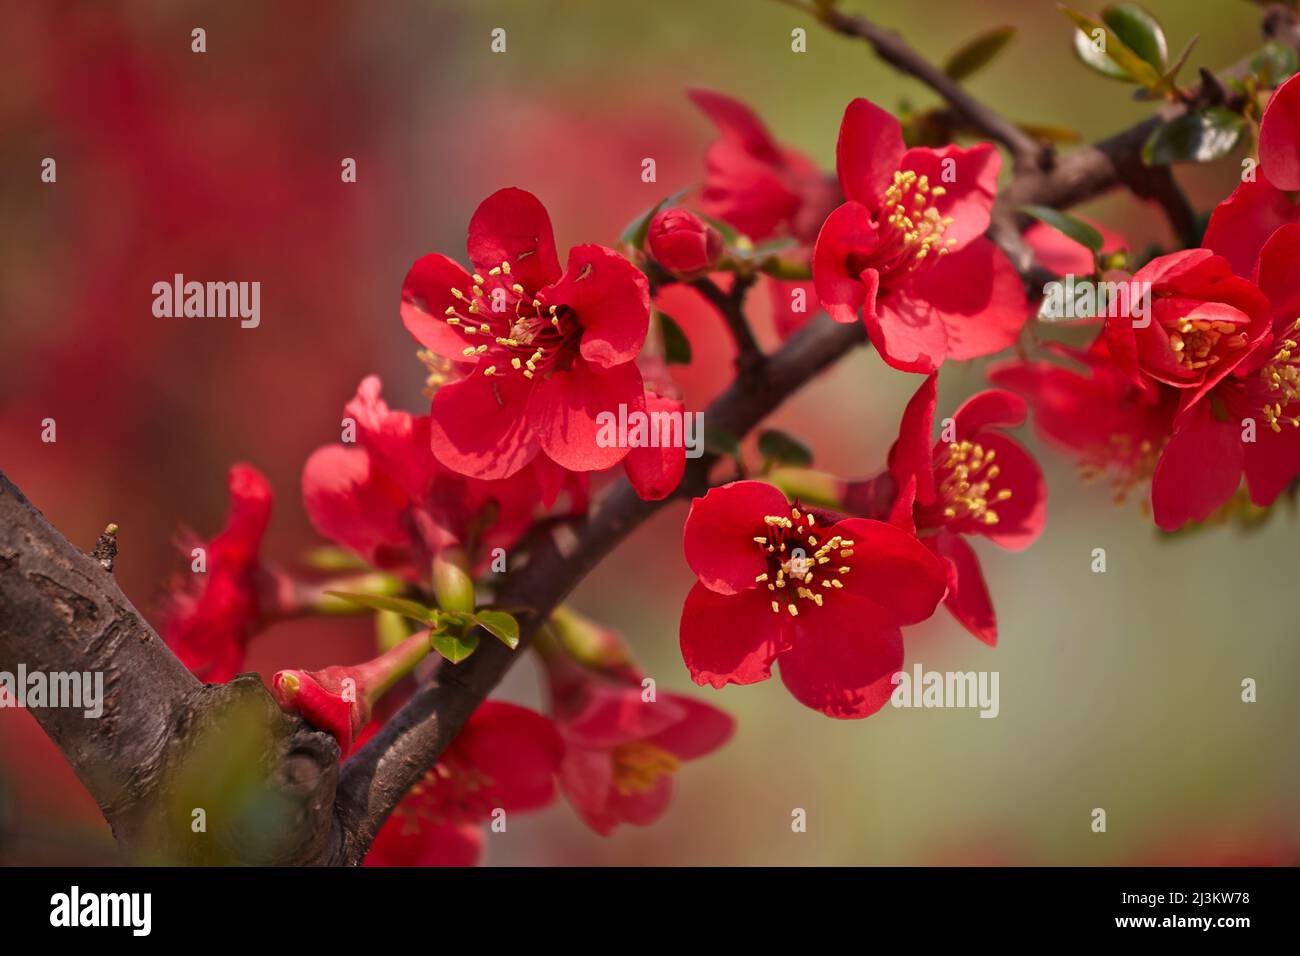 A Japanese quince, Chaenomeles species, in flower, in Xuanwu Park, Nanjing, Jiangsu province, China.; Xuanwu Park, Nanjing, Jiangsu province, China. Stock Photo